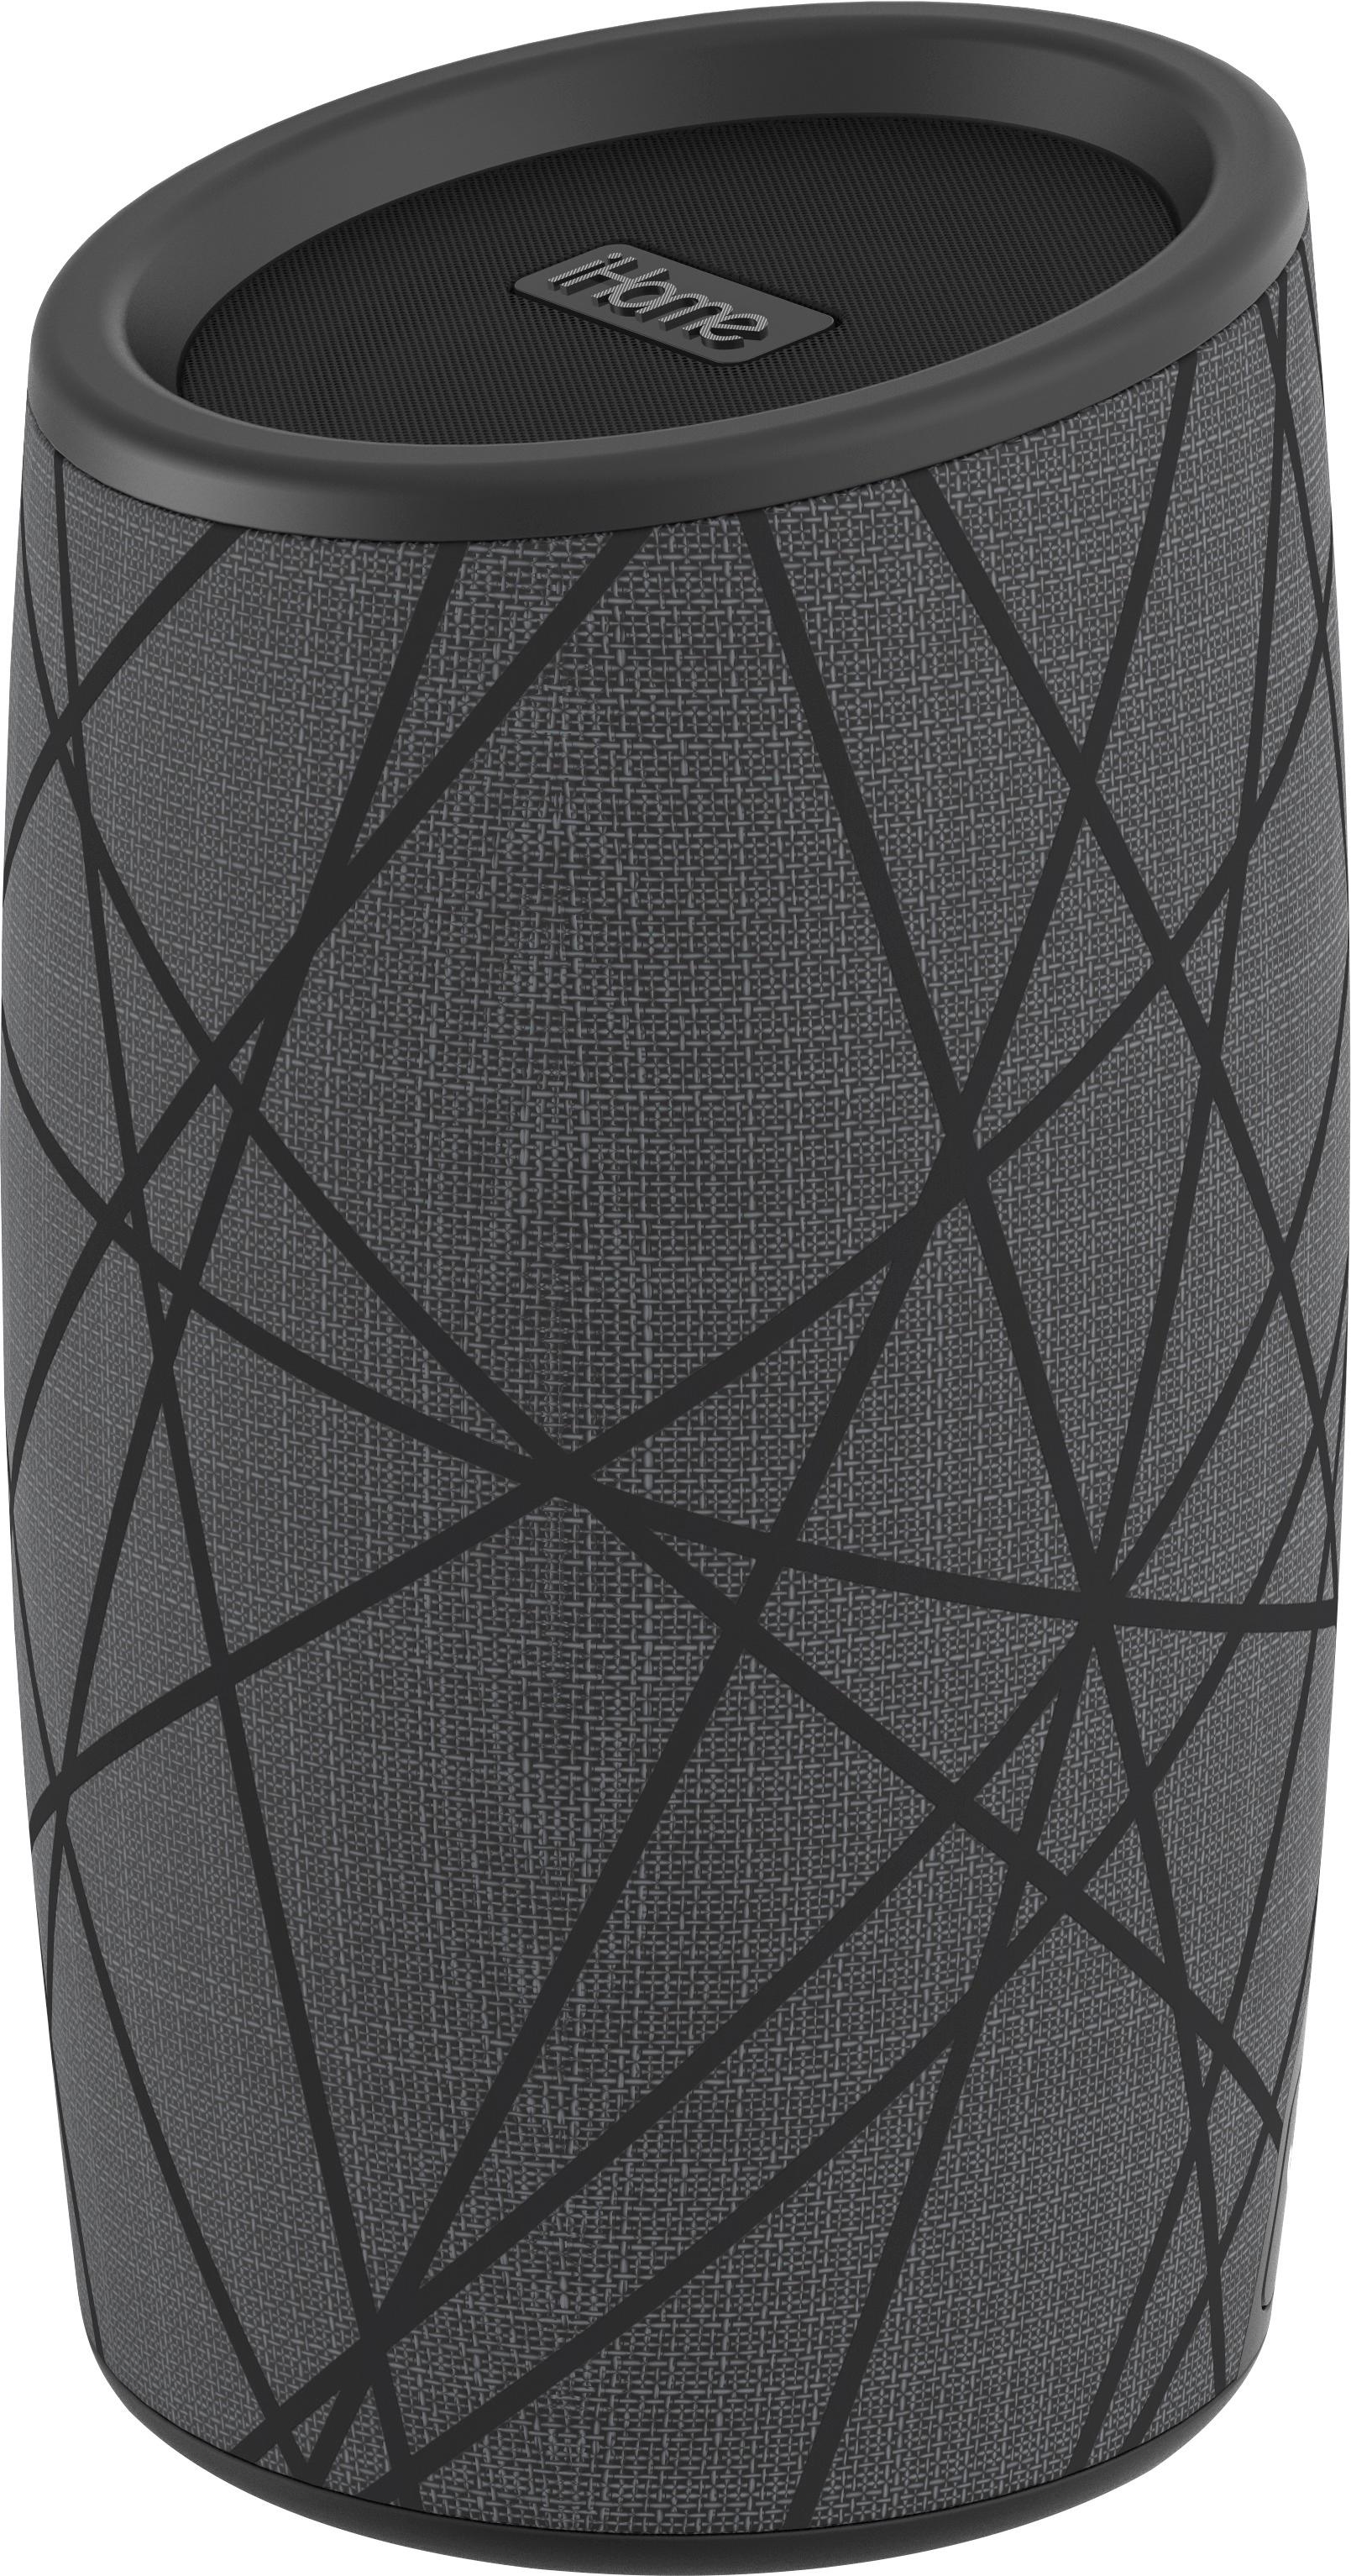 ihome acoustical knit bluetooth speaker